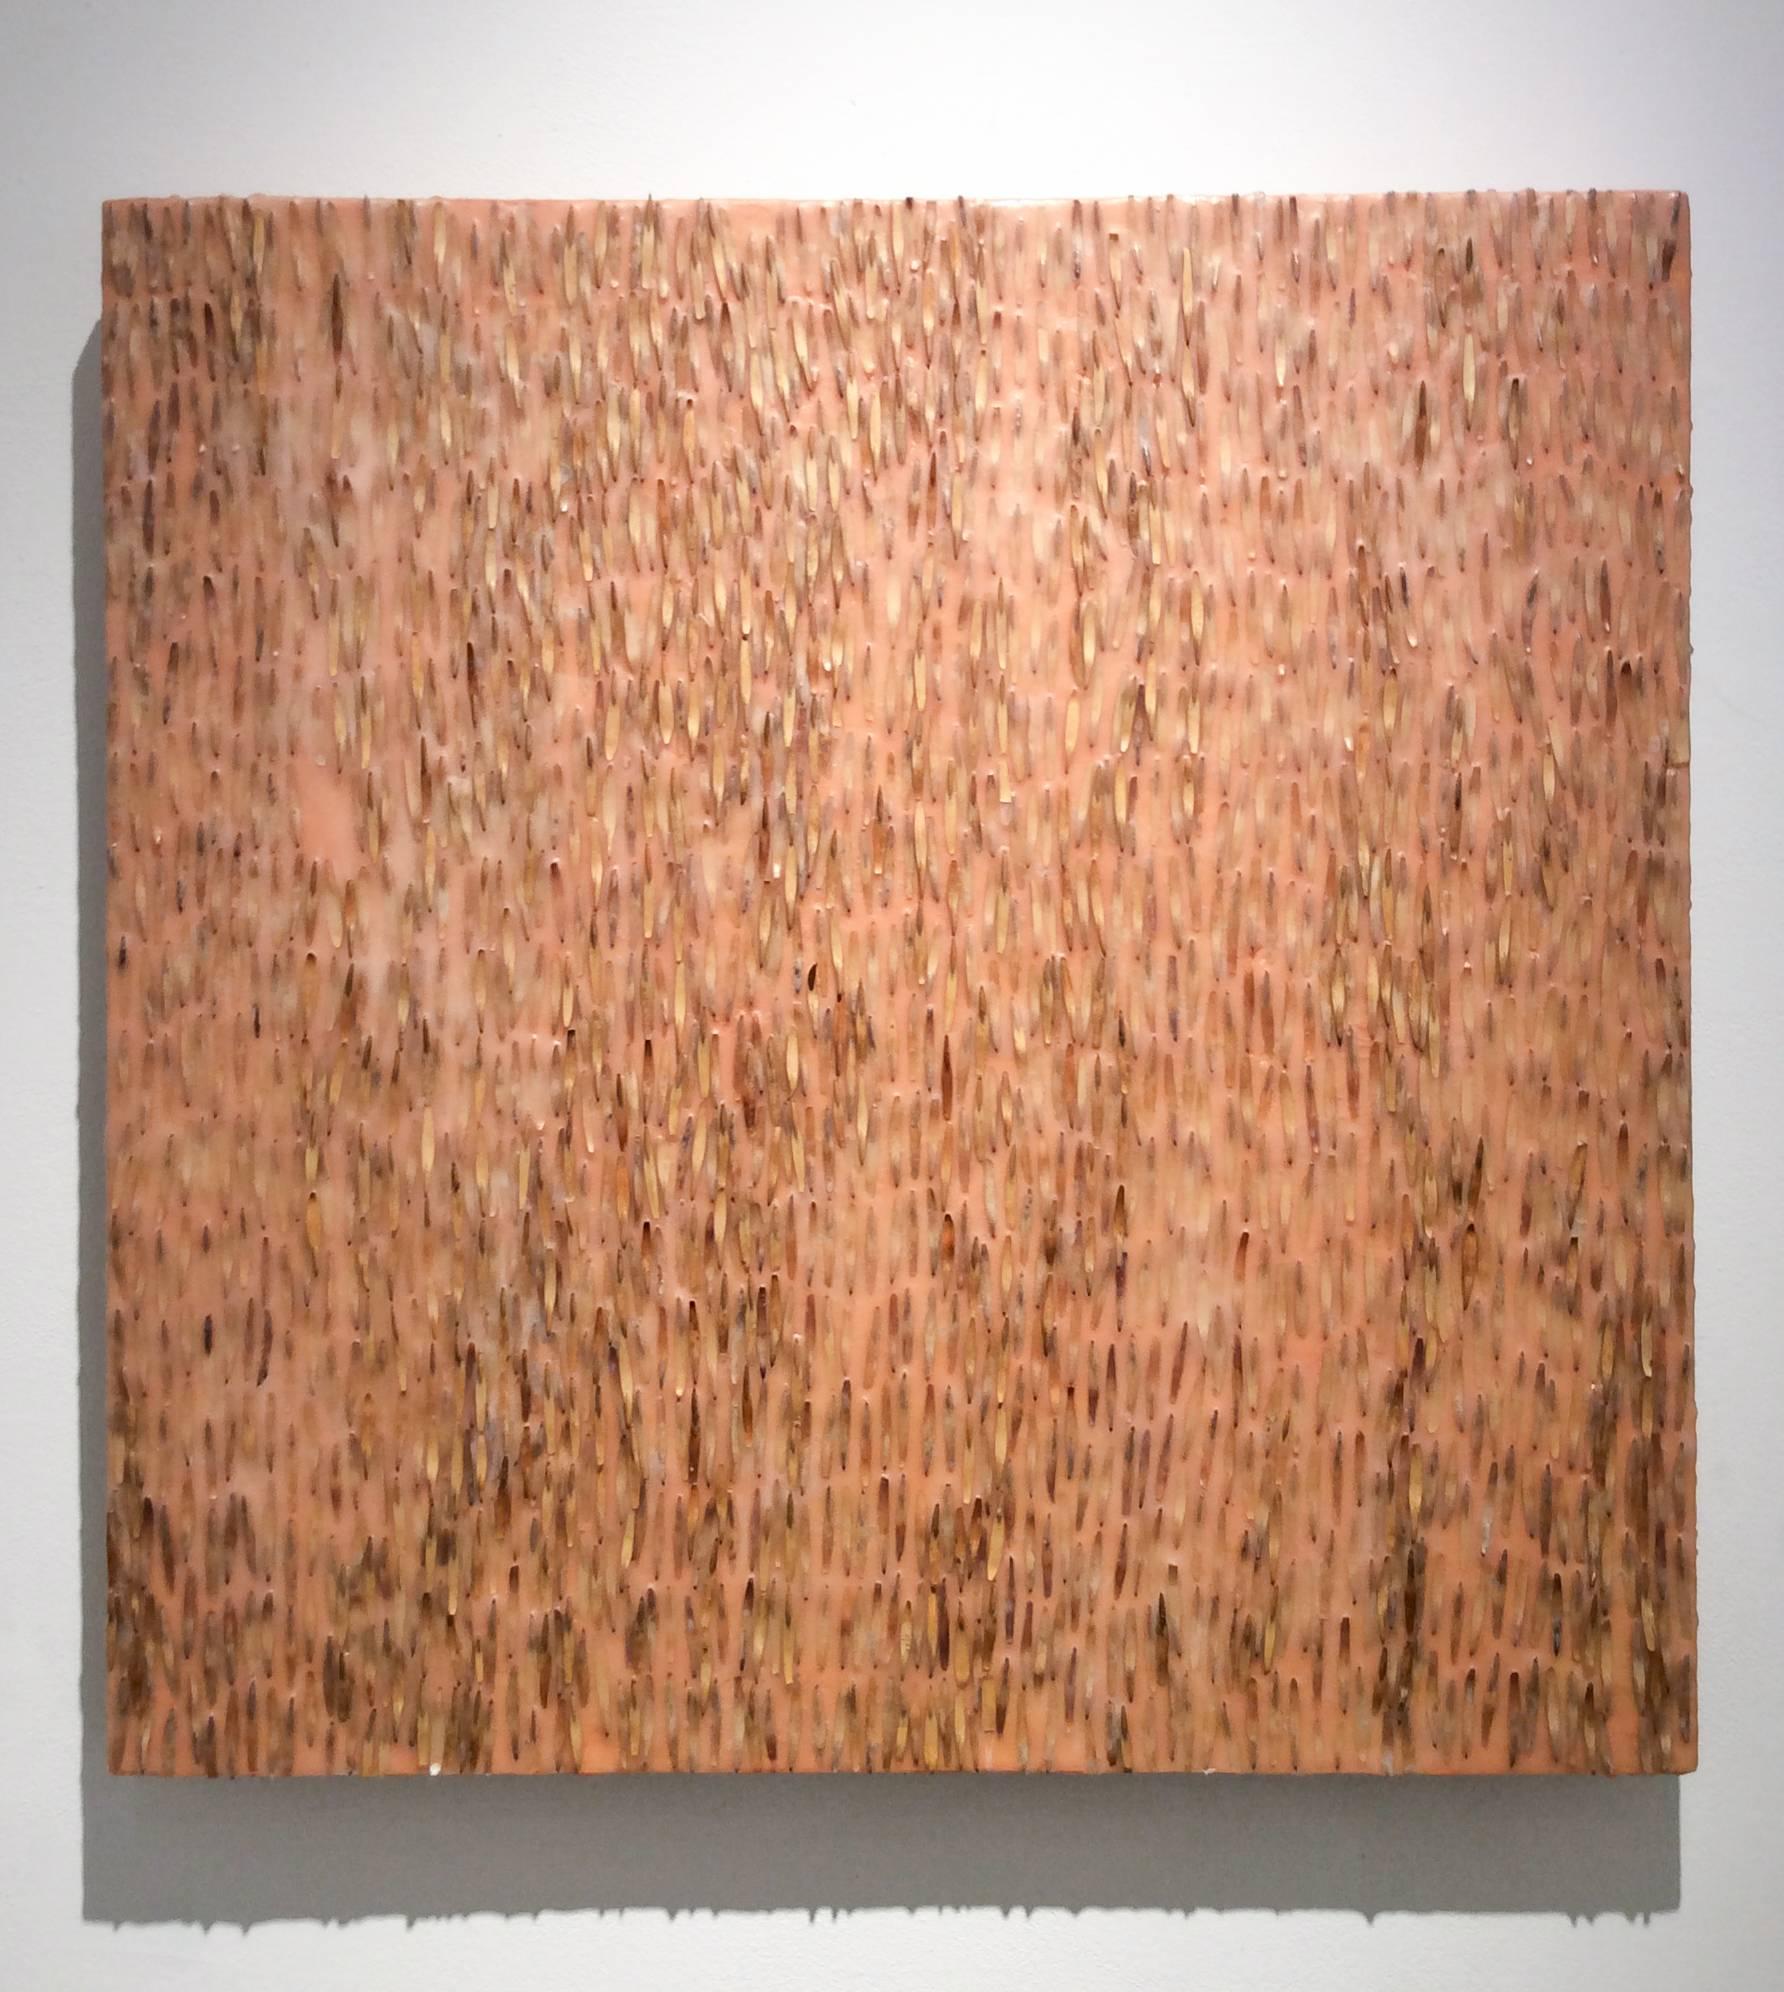 Abstract encaustic painting with dark brown and beige ash keys against a light orange background
24 x 24 x 1.5 inches 

This modern abstract encaustic painting by Allyson Levy is made with assorted beige and light brown ash keys encased in a layer